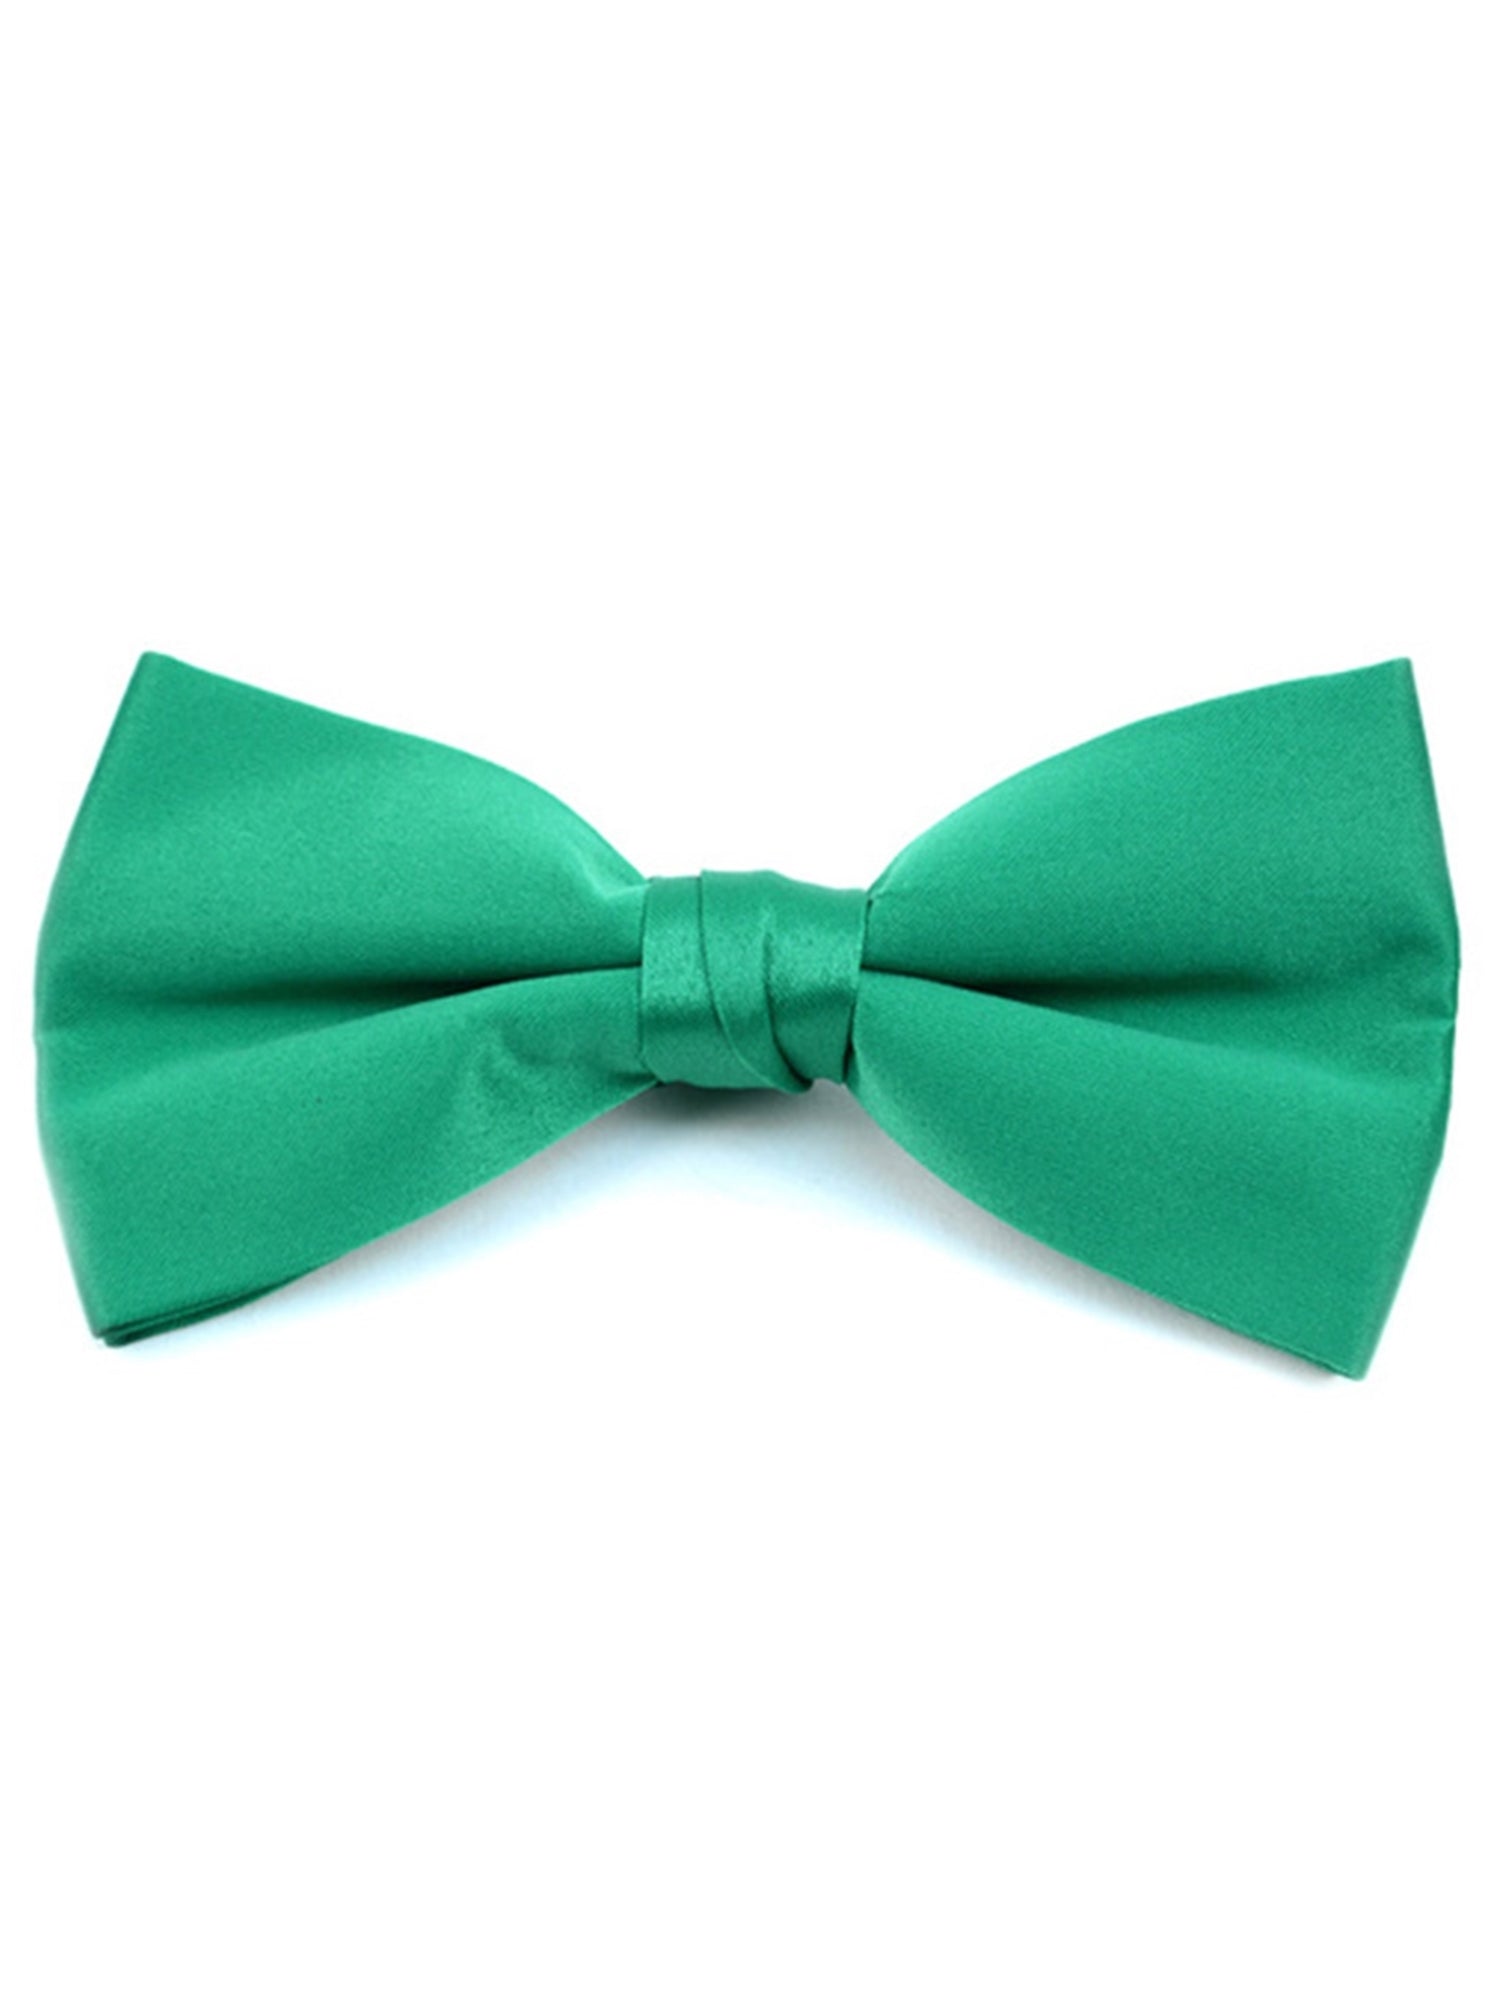 Young Boy's Pre-tied Adjustable Length Bow Tie - Formal Tuxedo Solid Color Boy's Solid Color Bow Tie TheDapperTie Green One Size 